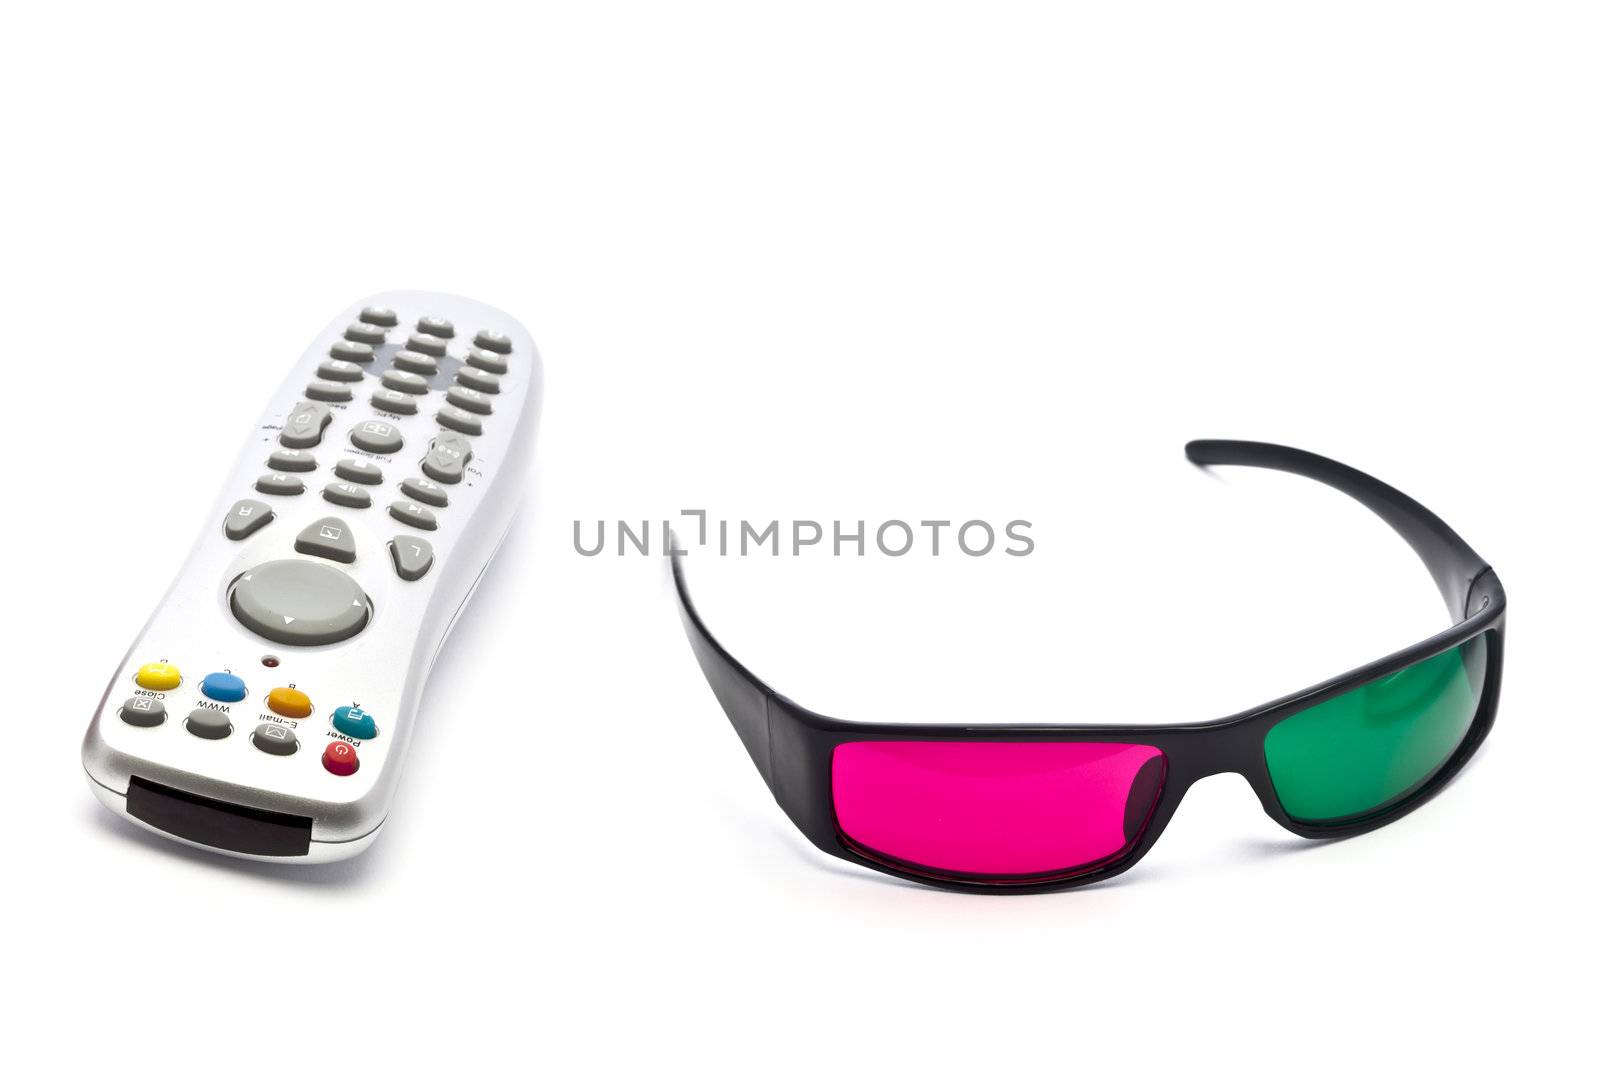 A pair of anaglyph 3D glasses and remote control on a white background.